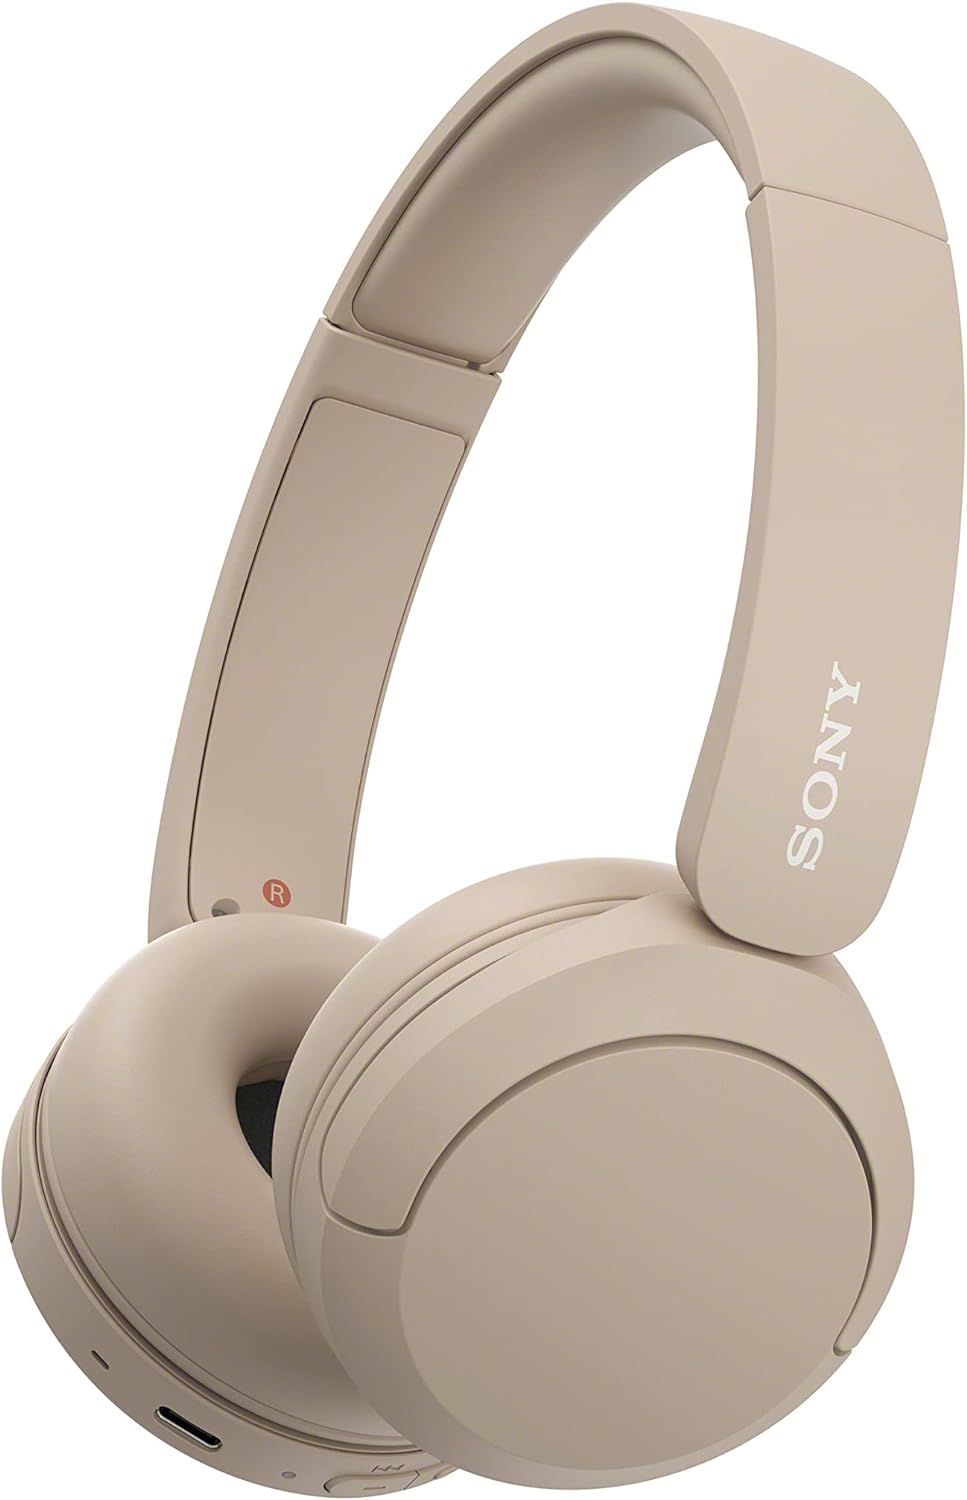 Sony Wireless Bluetooth Headphones - Up to 50 Hours Battery Life with Quick Charge Function, On-E... | Amazon (US)